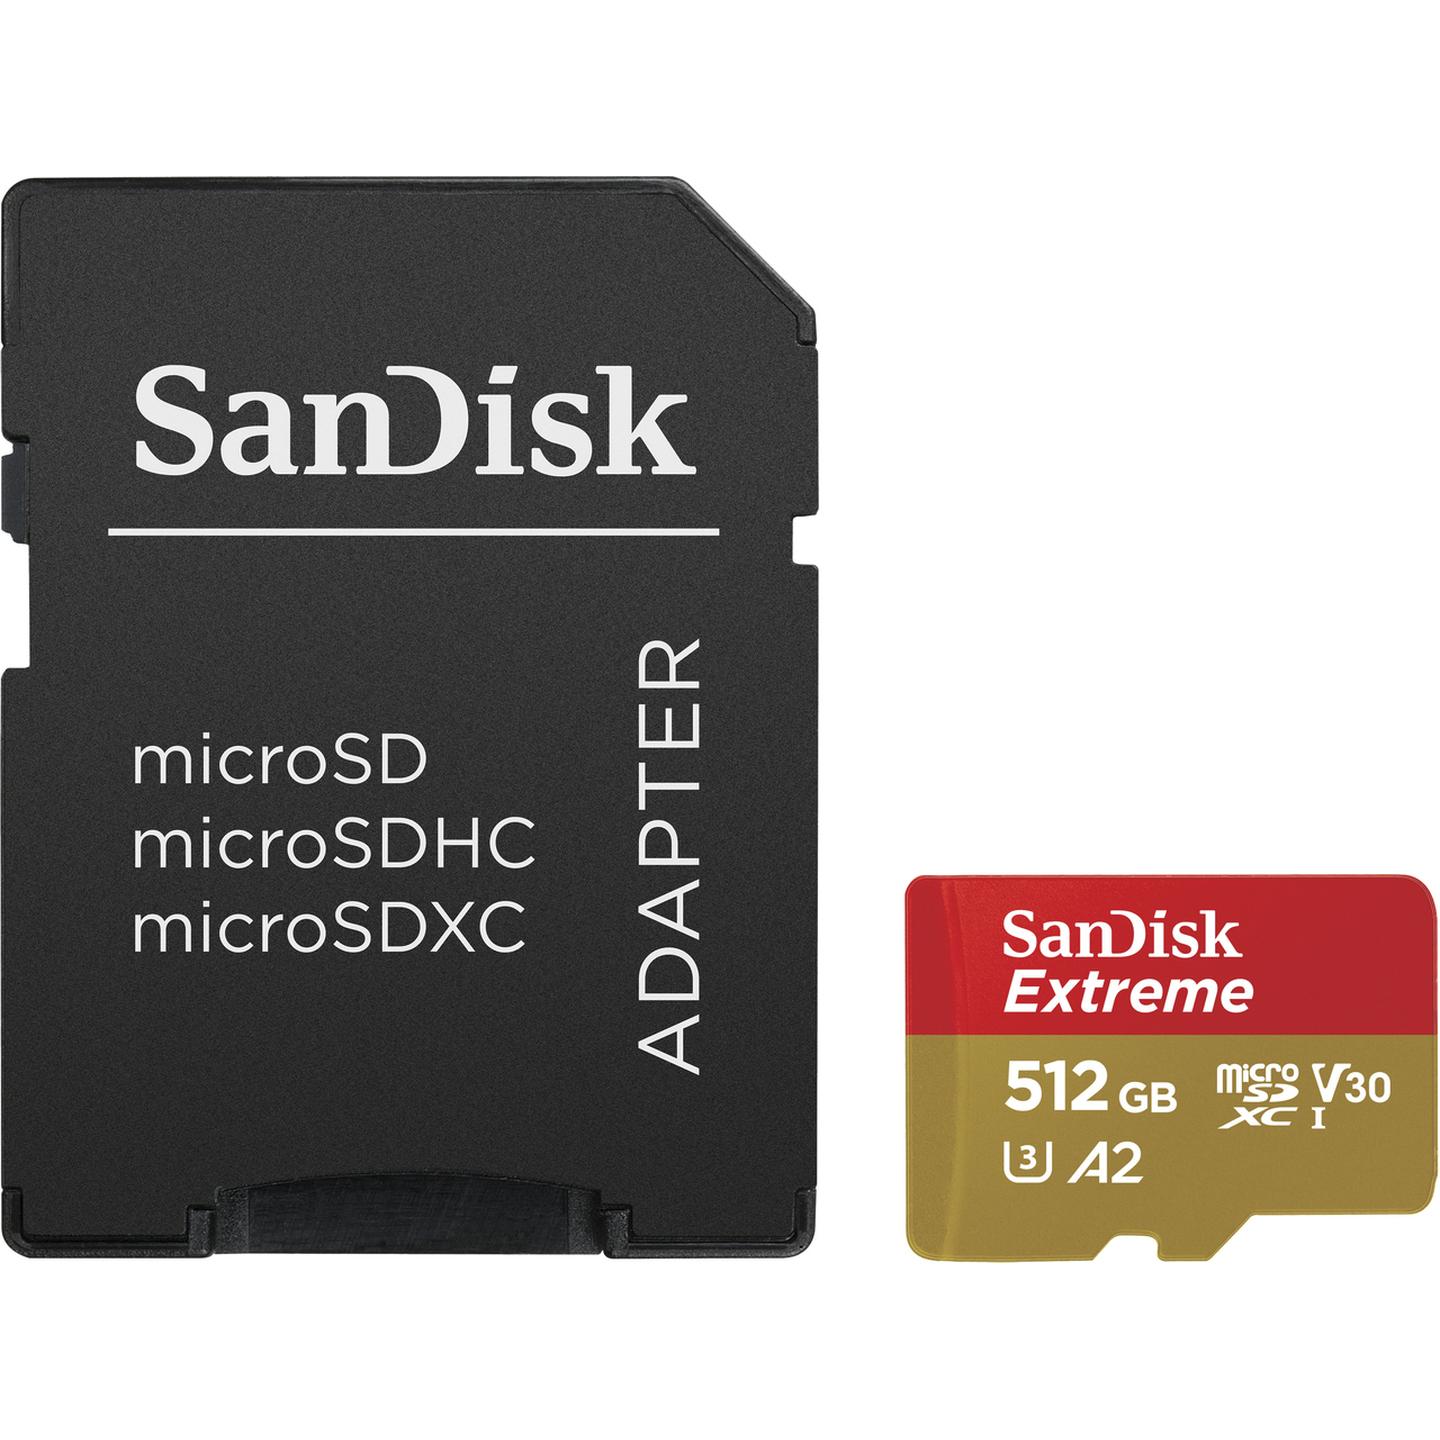 Sandisk 512GB High Extreme microSDXC Class 10 Reads 190MB/S Writes 130MB/S 